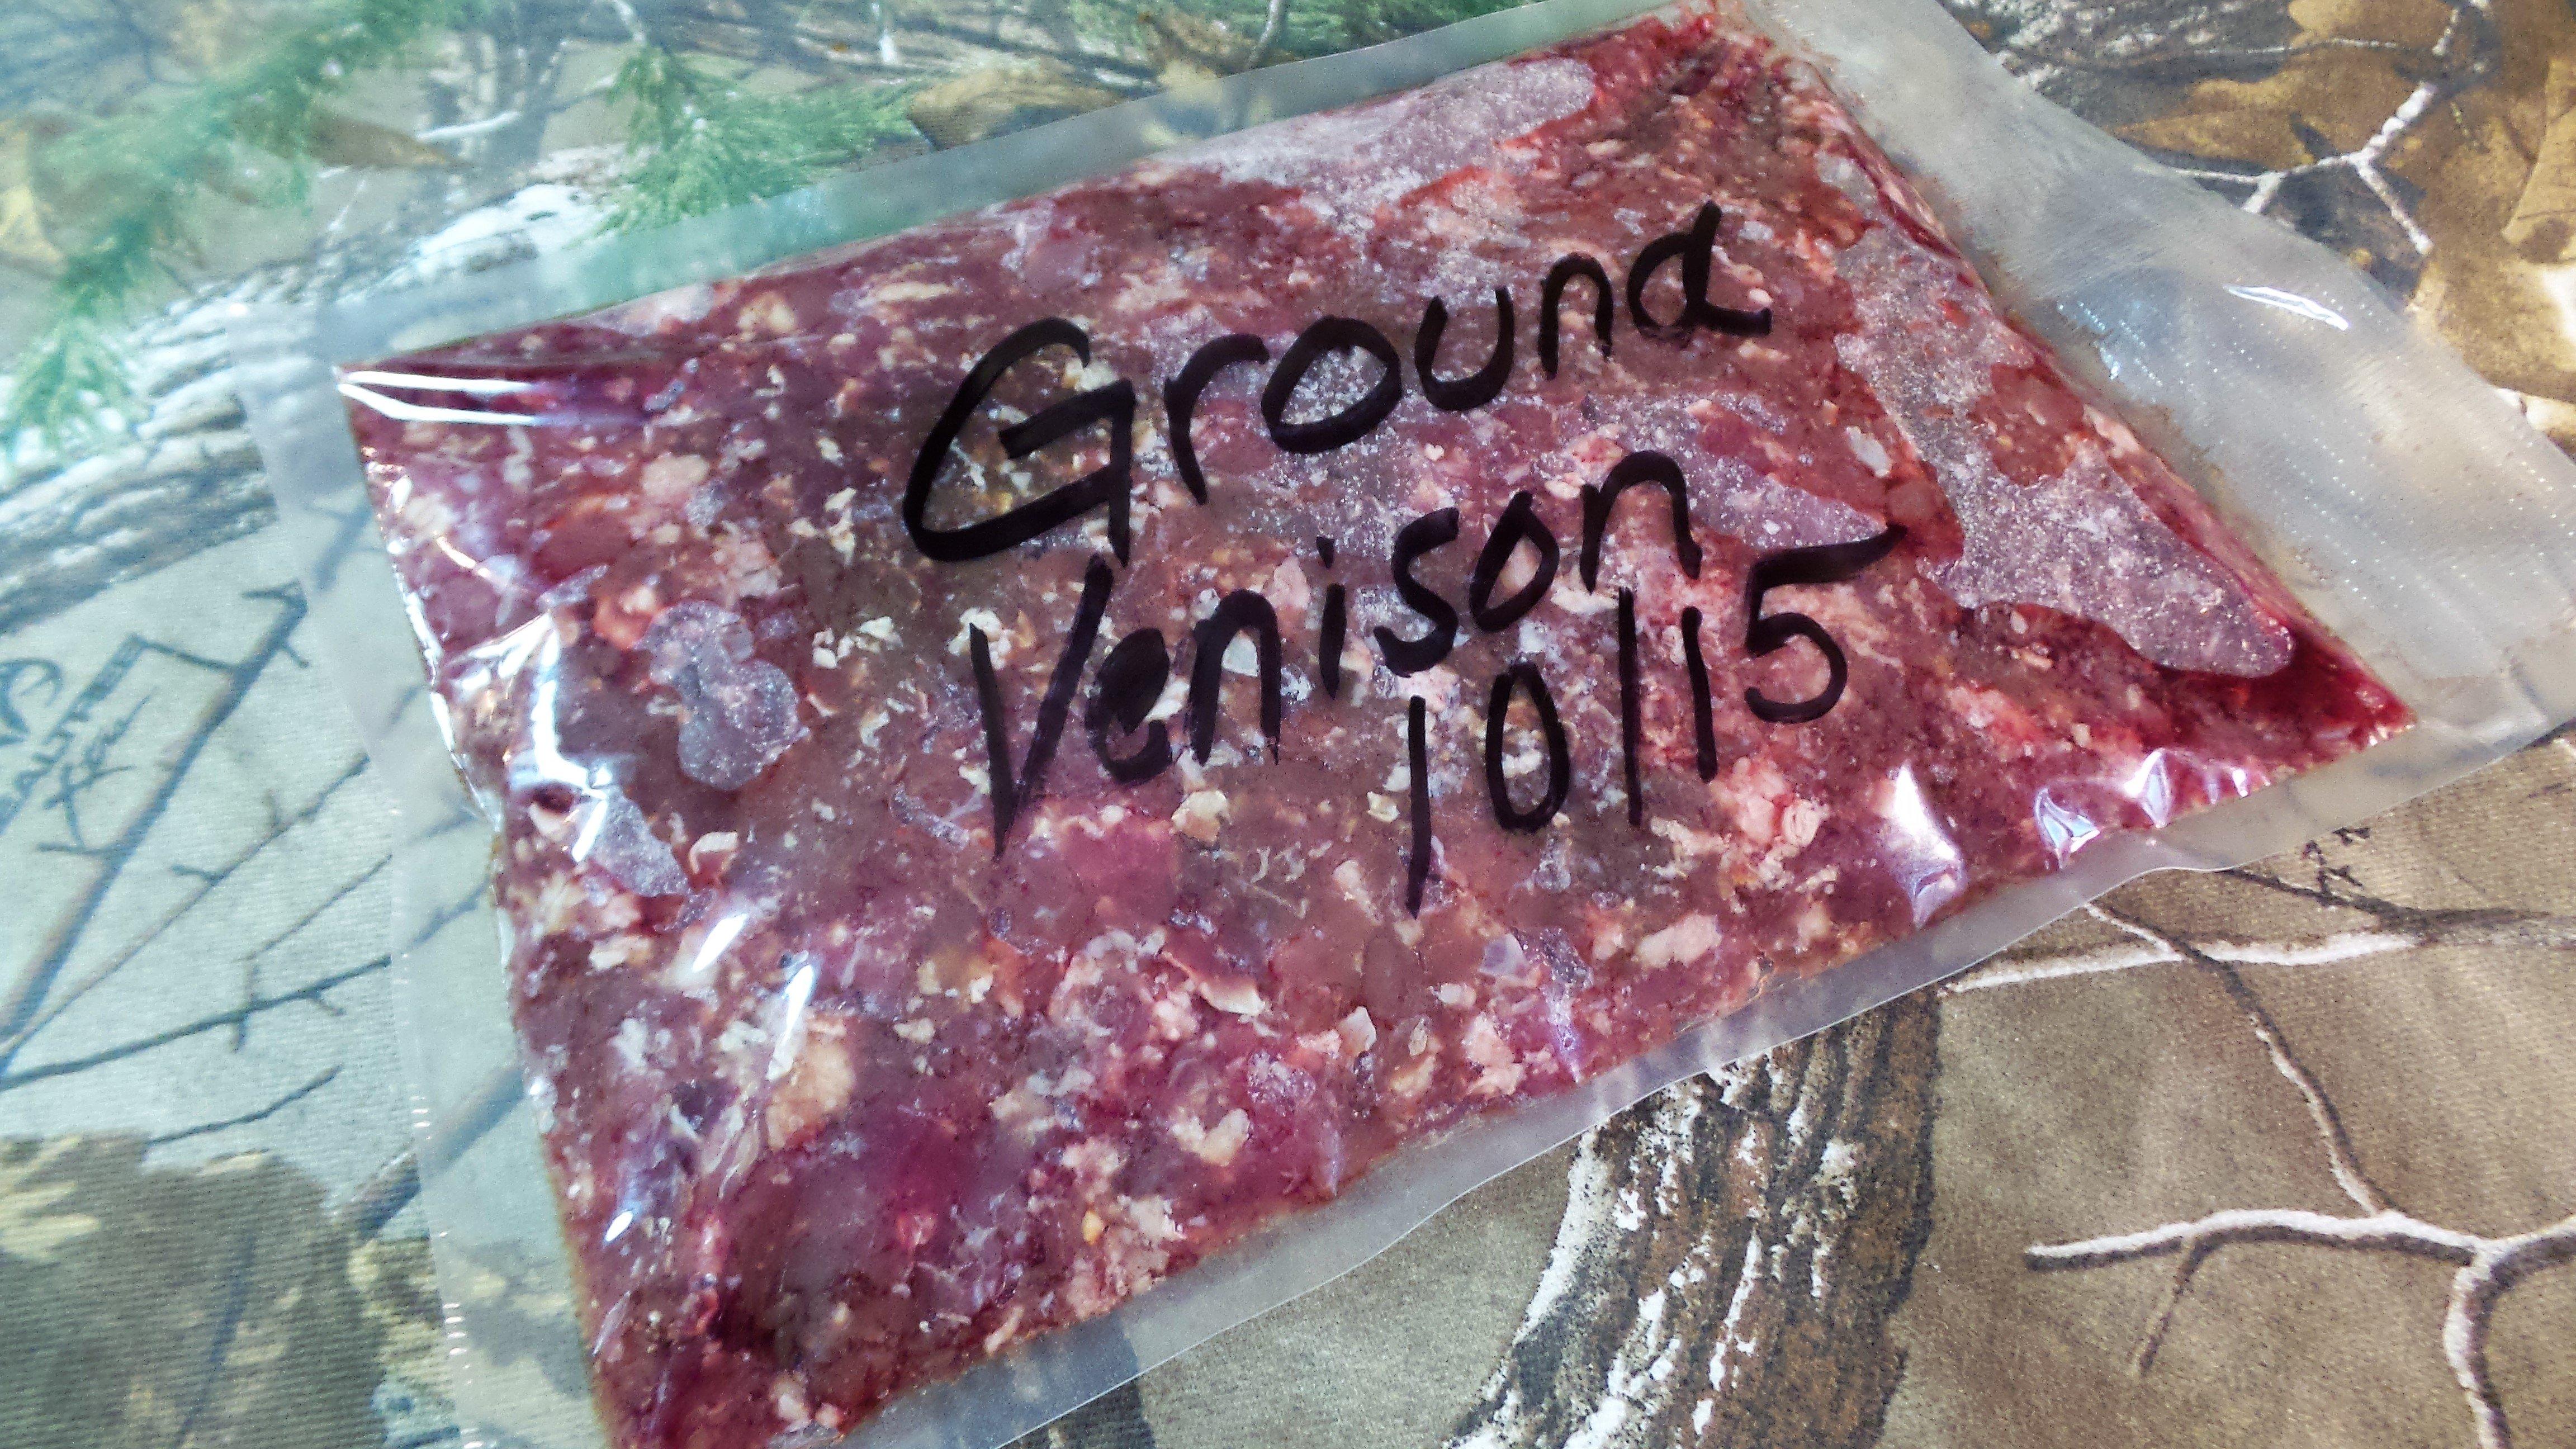 Pack your venison flat and thin for quick freezing, easy stacking and faster thawing.